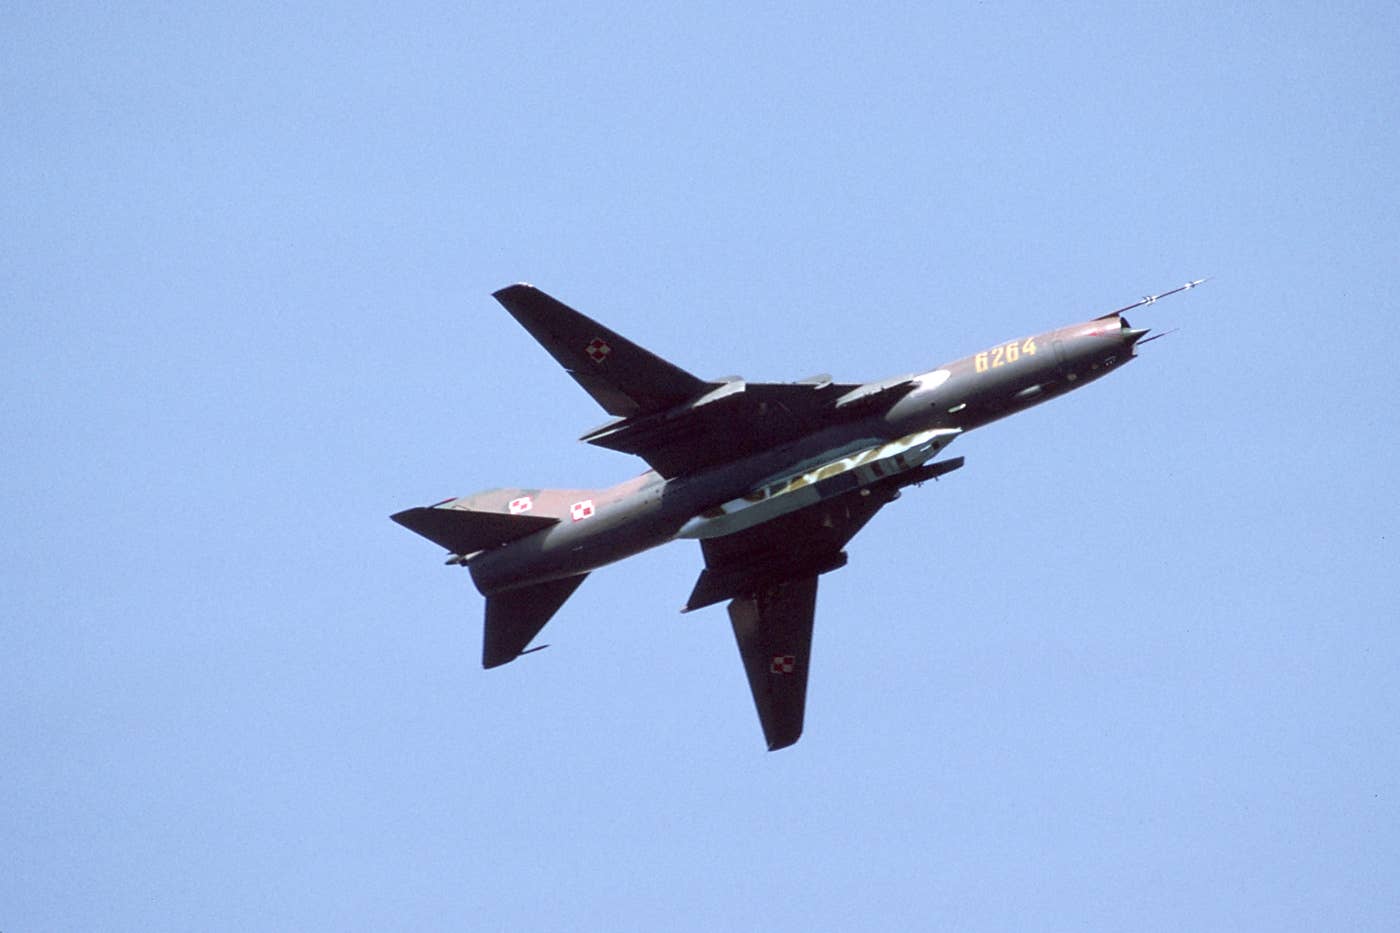 A Polish Su-20 Fitter-C, one of the predecessors of the Su-22M4, photographed in August 1991, with a KKR-series pod under the fuselage. <em>Rob Schleiffert/Wikimedia Commons</em>